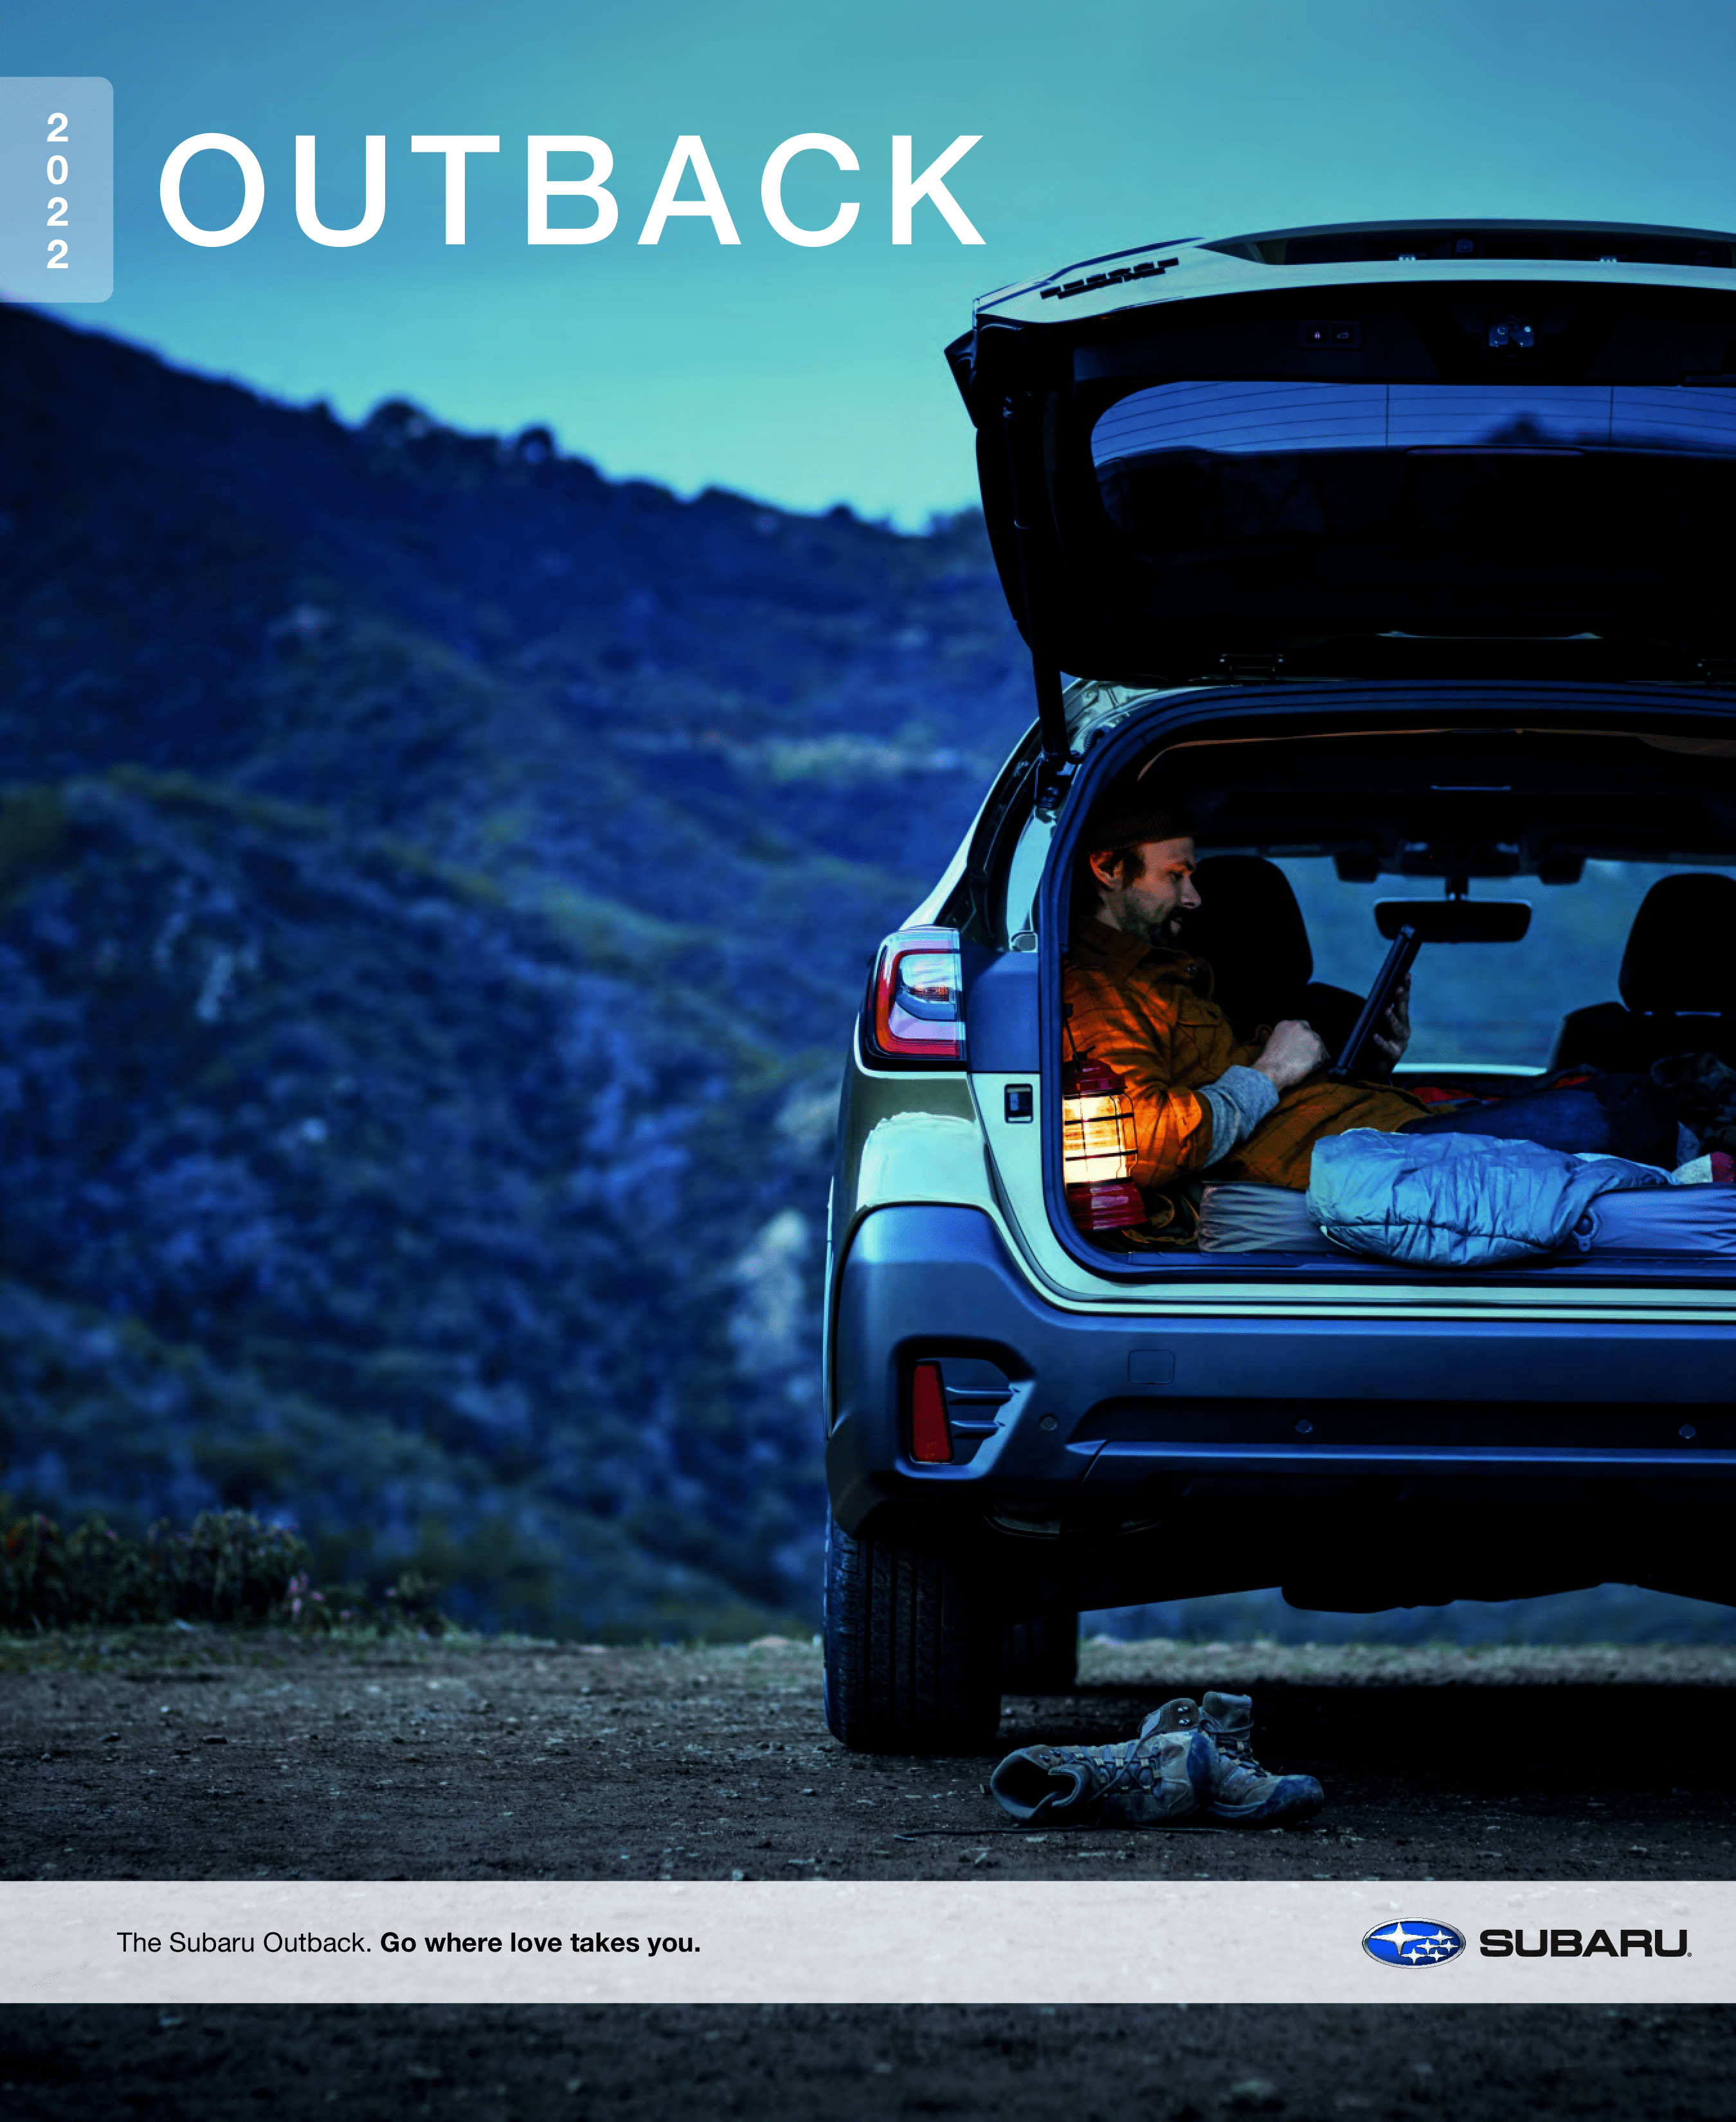 2022 Outback image with link to brochure.